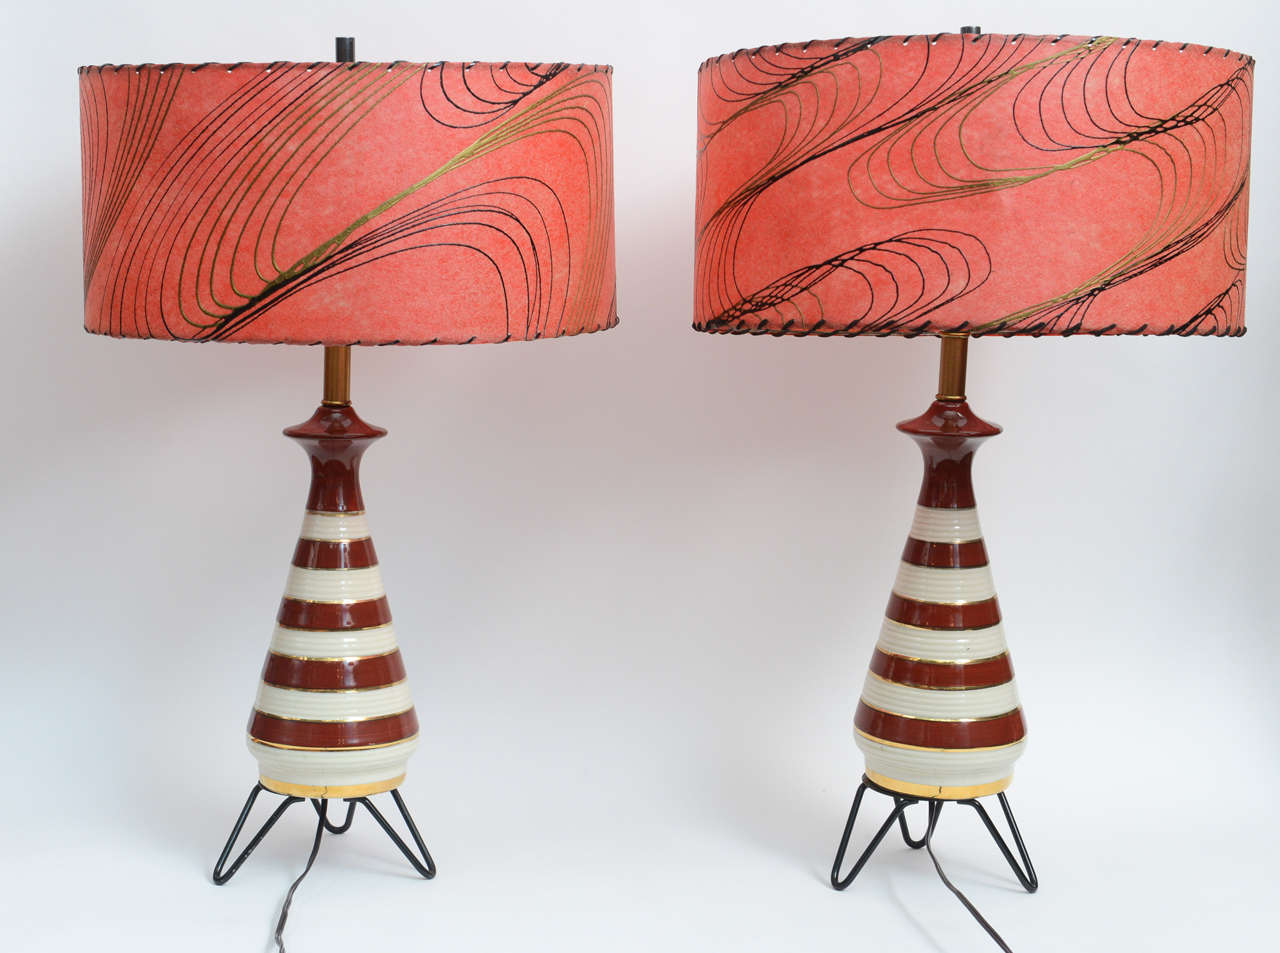 Incredible, inimitable, classic:  these table lamps take you back to Italy with Sophia Loren or Vegas with the Rat Pack. These beautiful ceramic lamps come with their original shades.  The bases include glossy concentric stripes of white, gold and